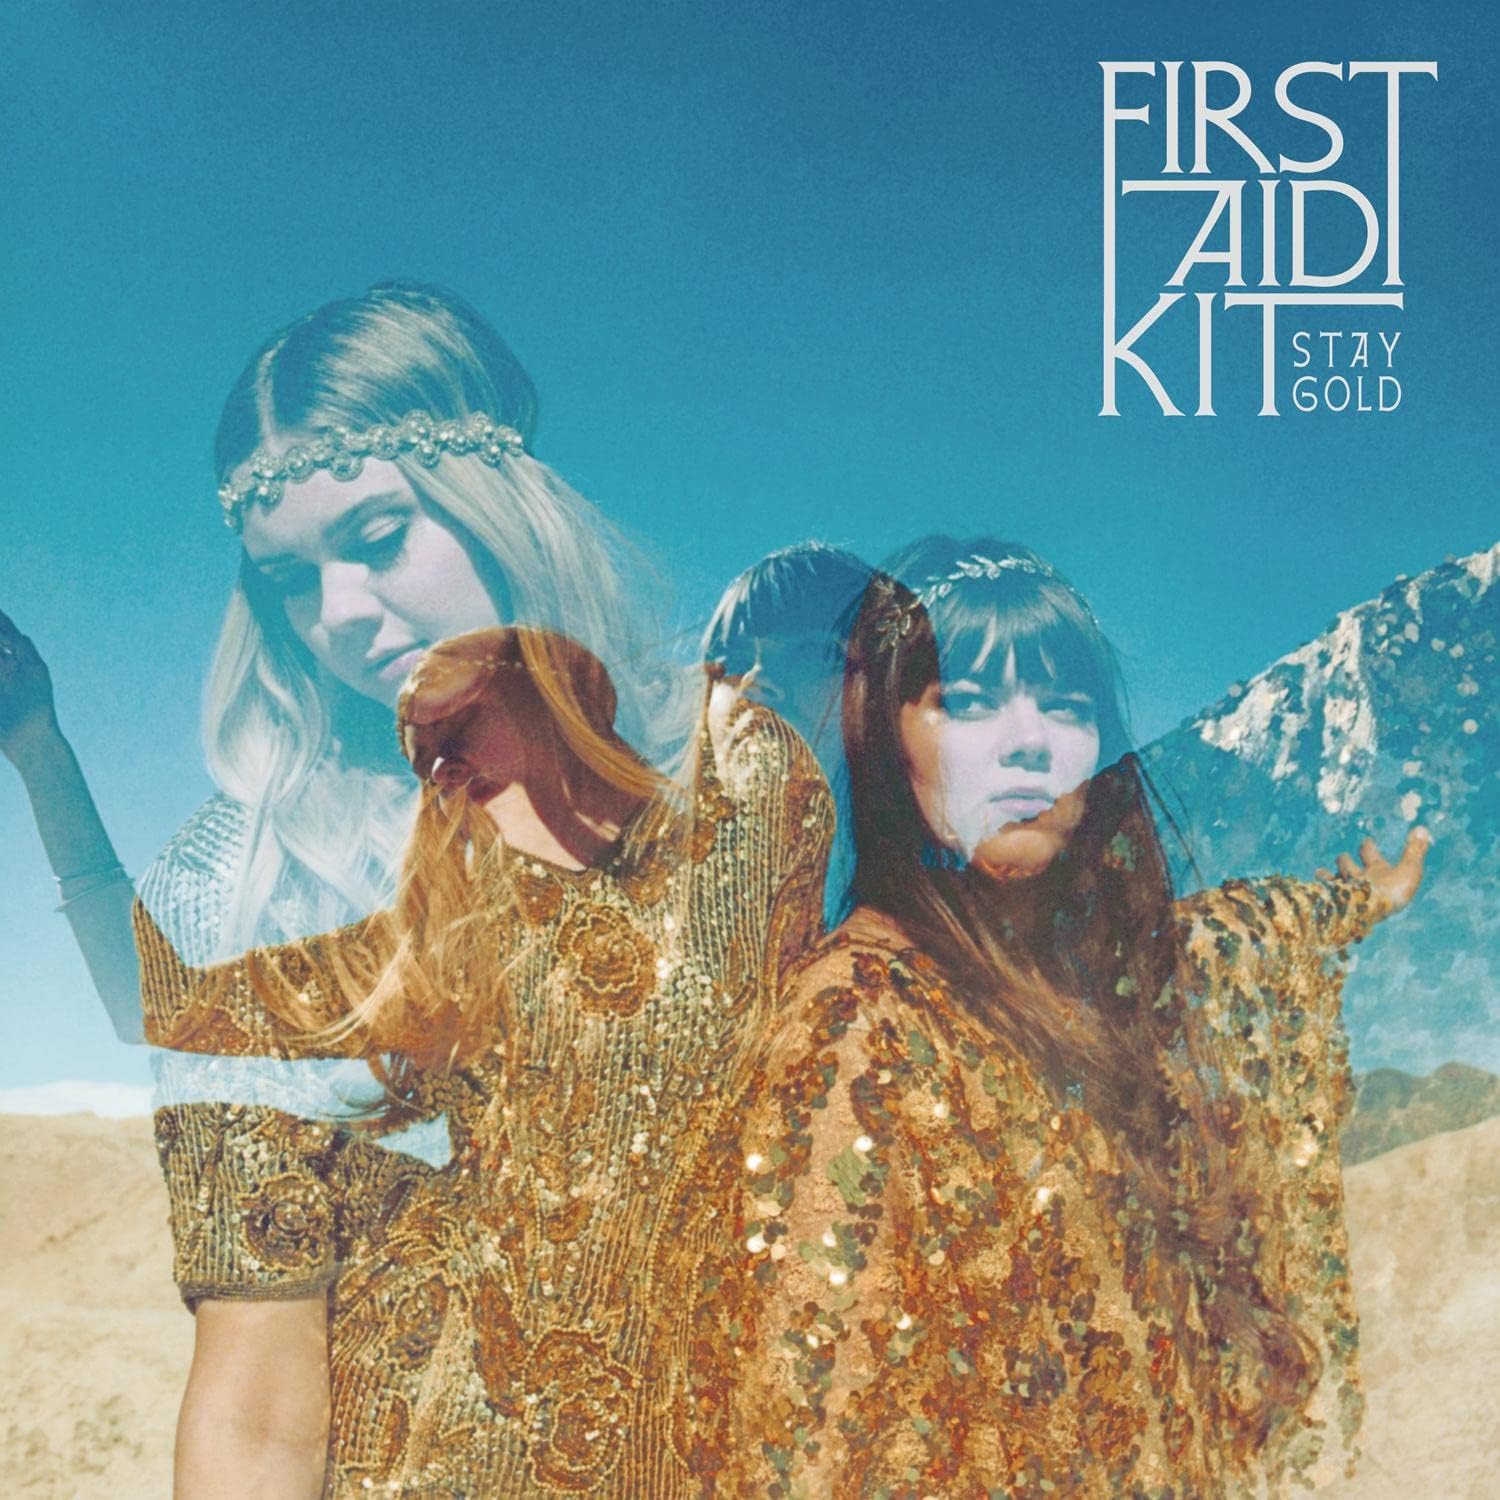 FIRST AID KIT - Stay Gold (10th Anniversary Edition) - LP - Gold Vinyl [AUG 9]